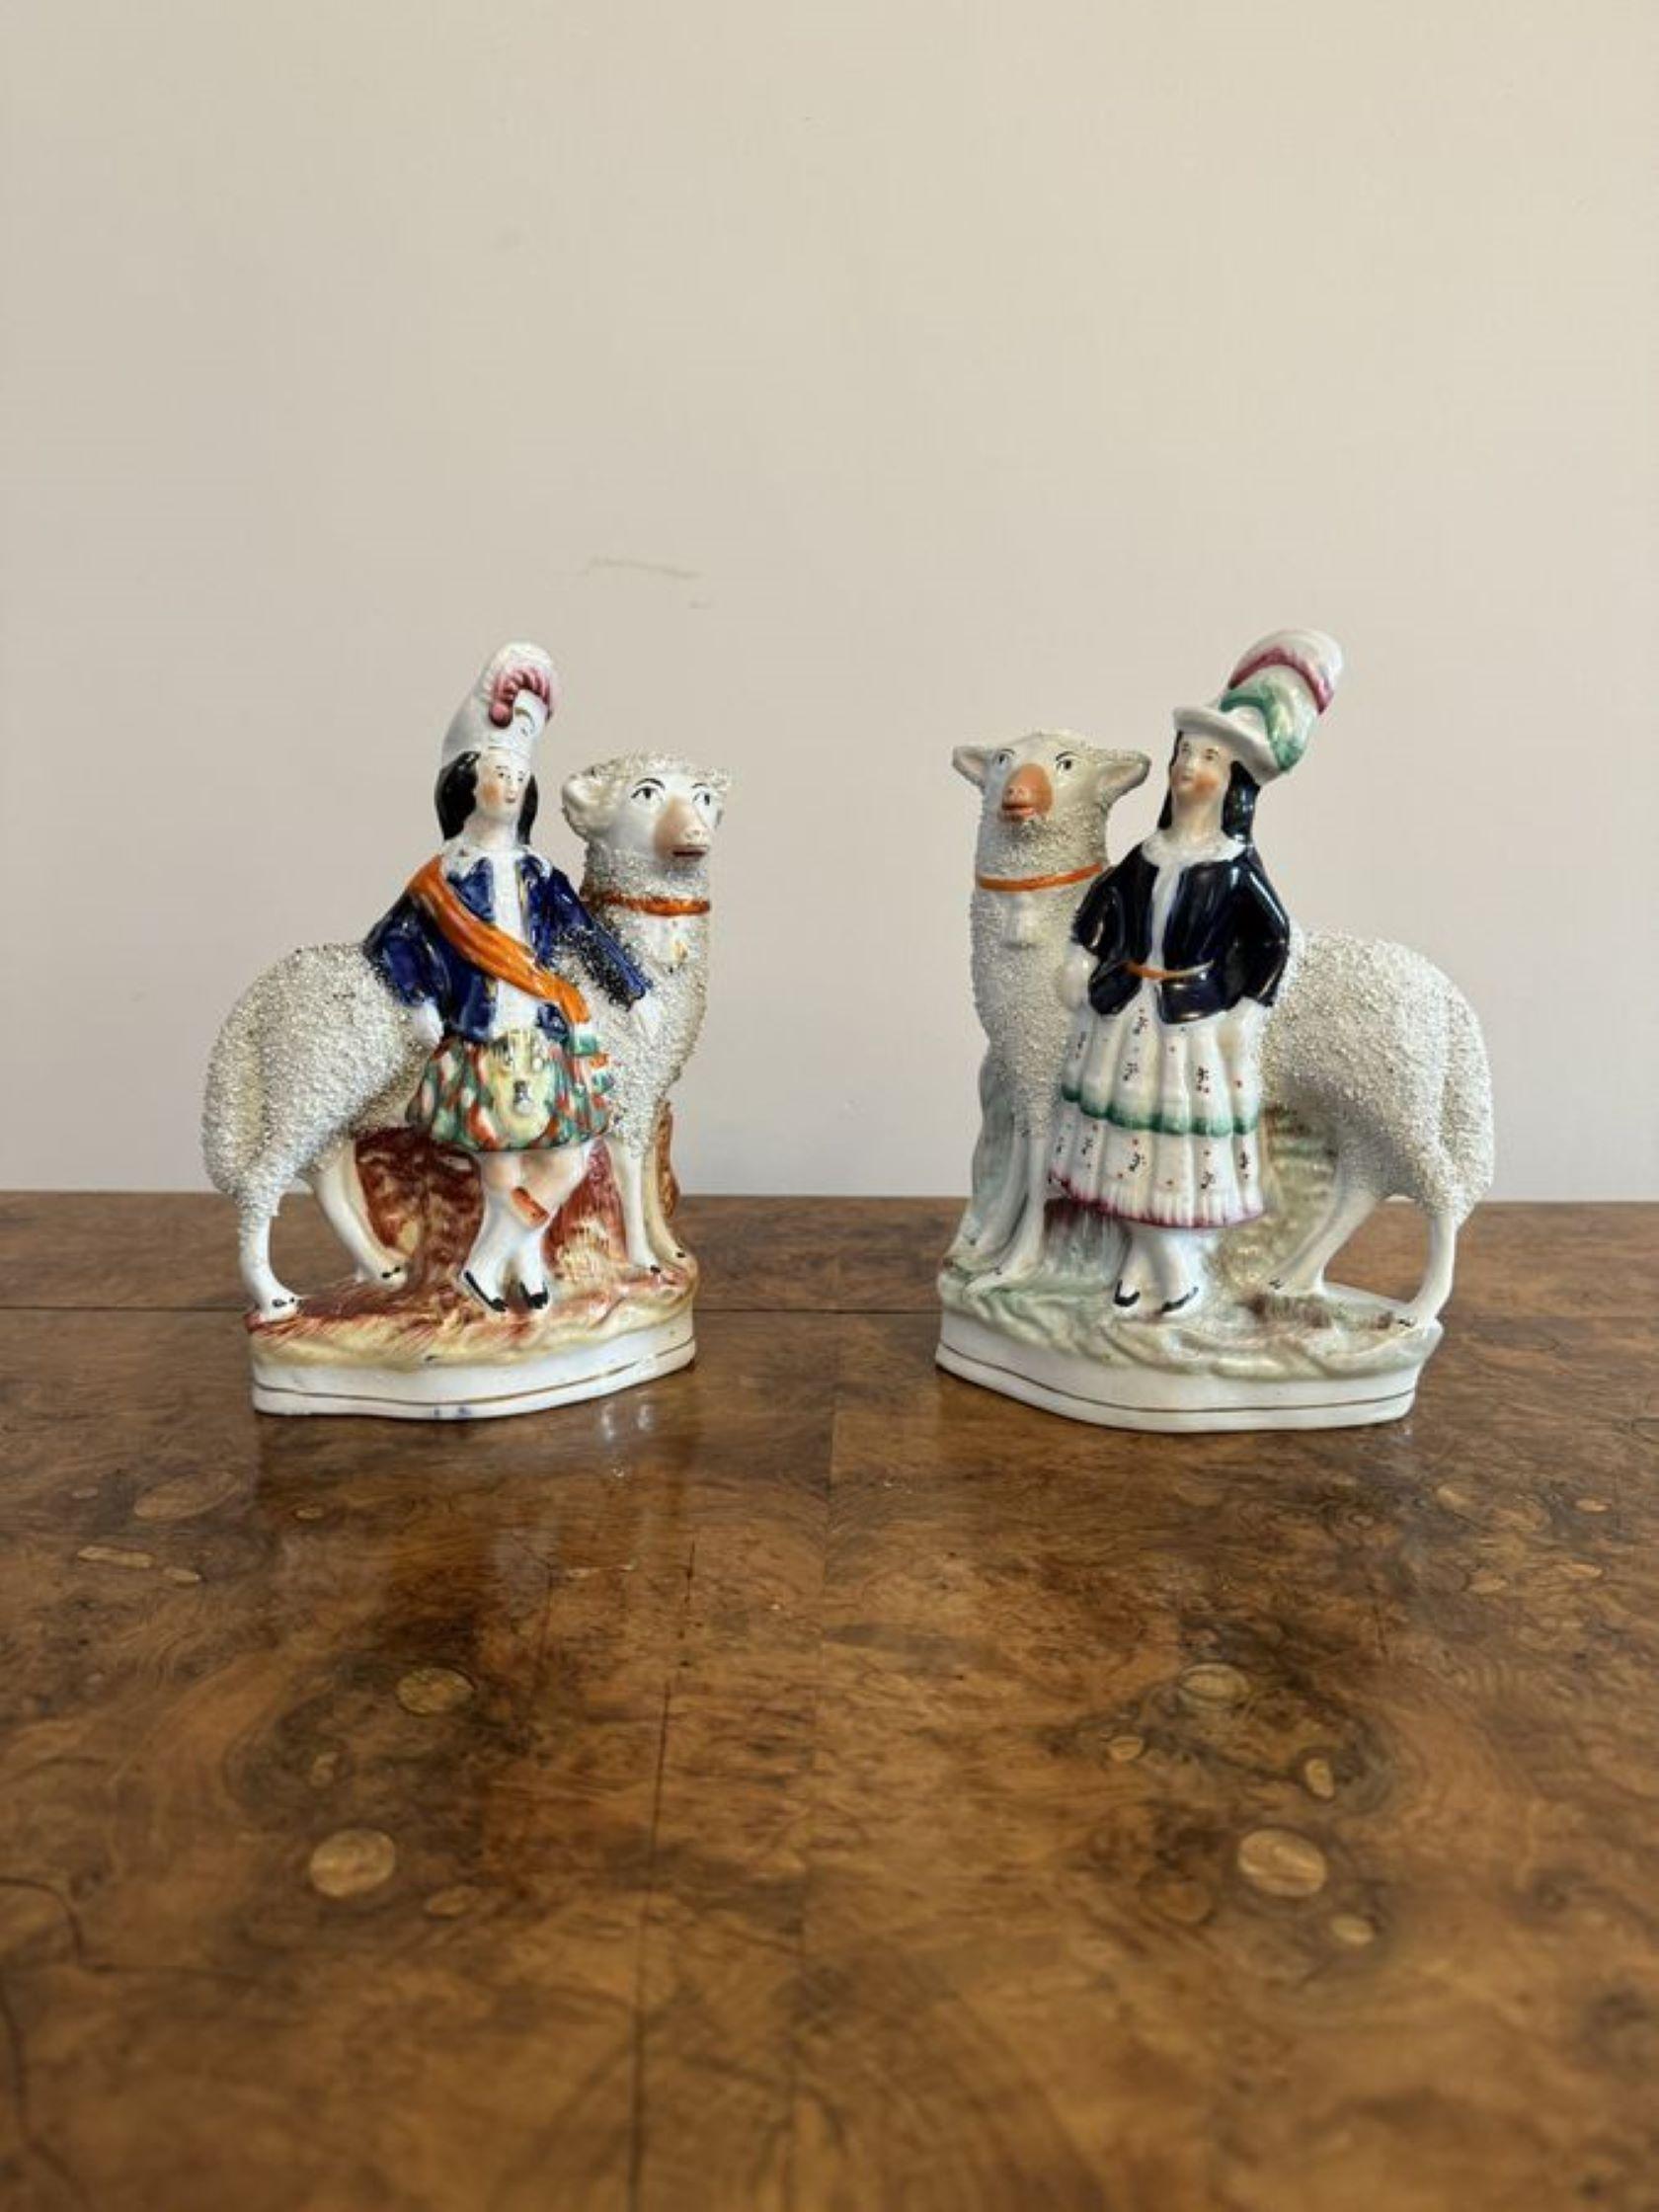 Unusual quality pair of antique Victorian 'Royal' Staffordshire figures, having a quality pair of figures of royal children standing next to sheep, modelled as royal portraits of the Prince of Wales (Edward Albert 1841–1910) shown in Scottish dress